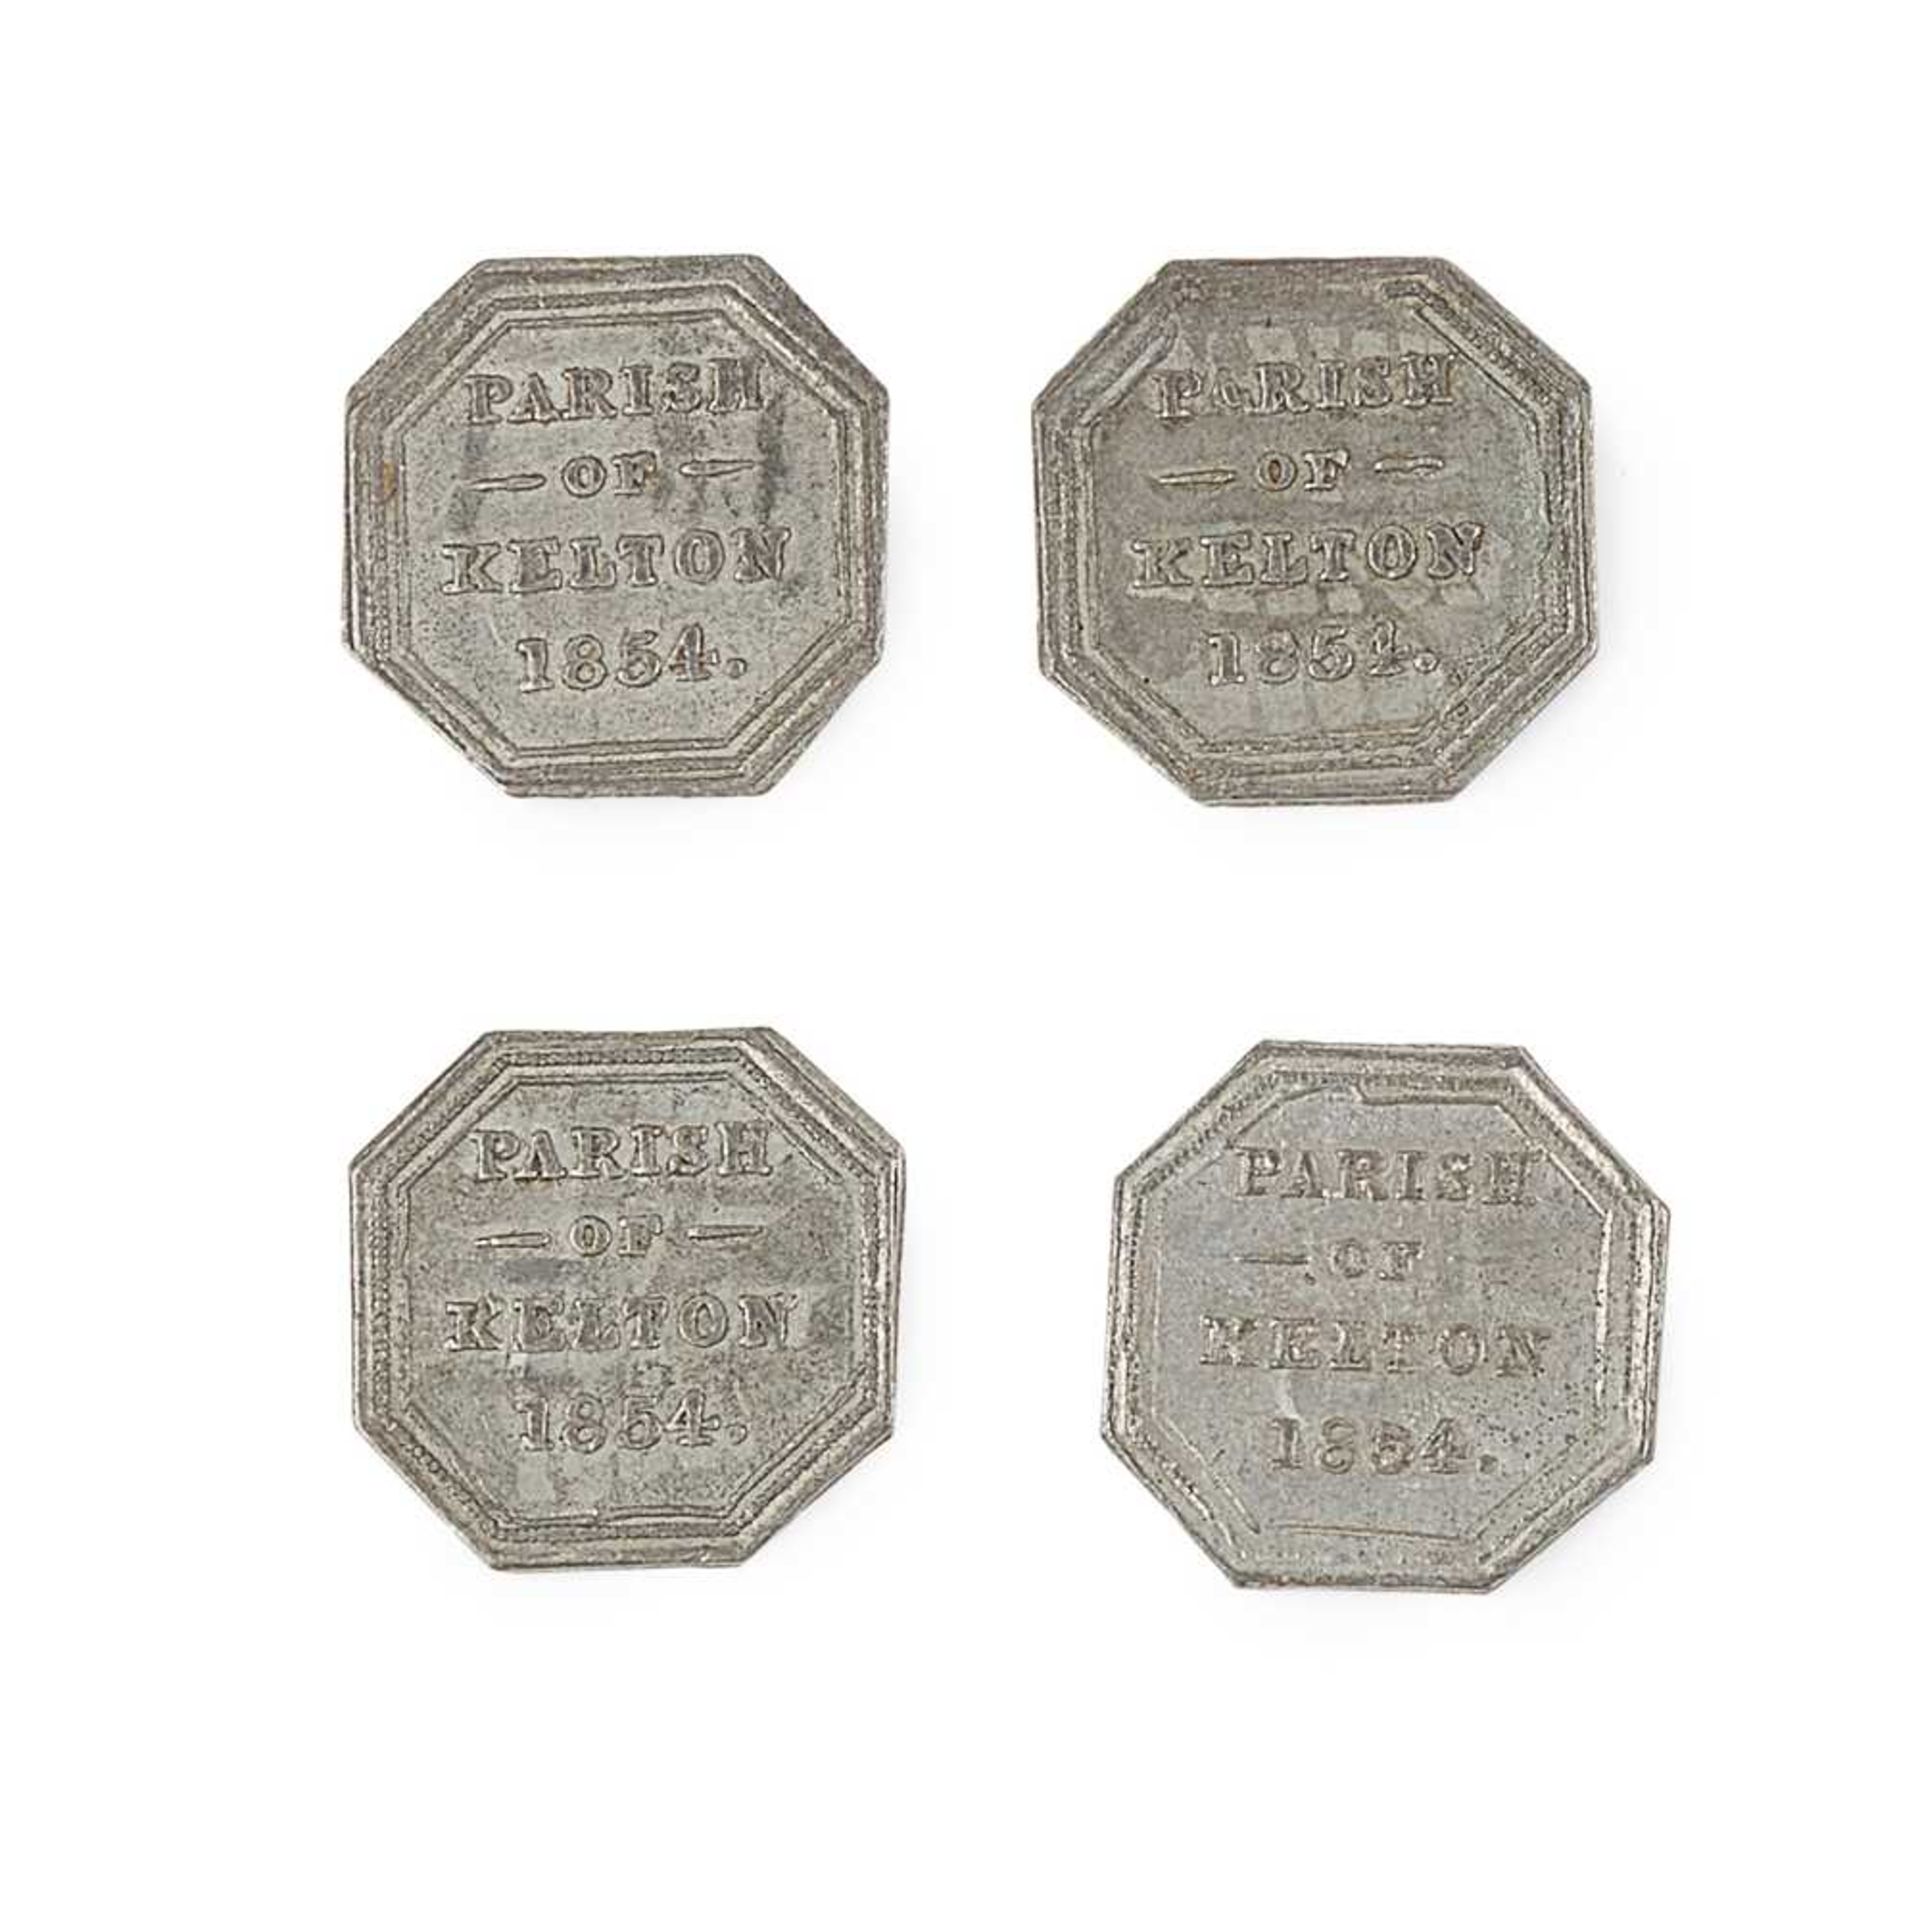 A COLLECTION OF SCOTTISH COMMUNION TOKENS 19TH CENTURY